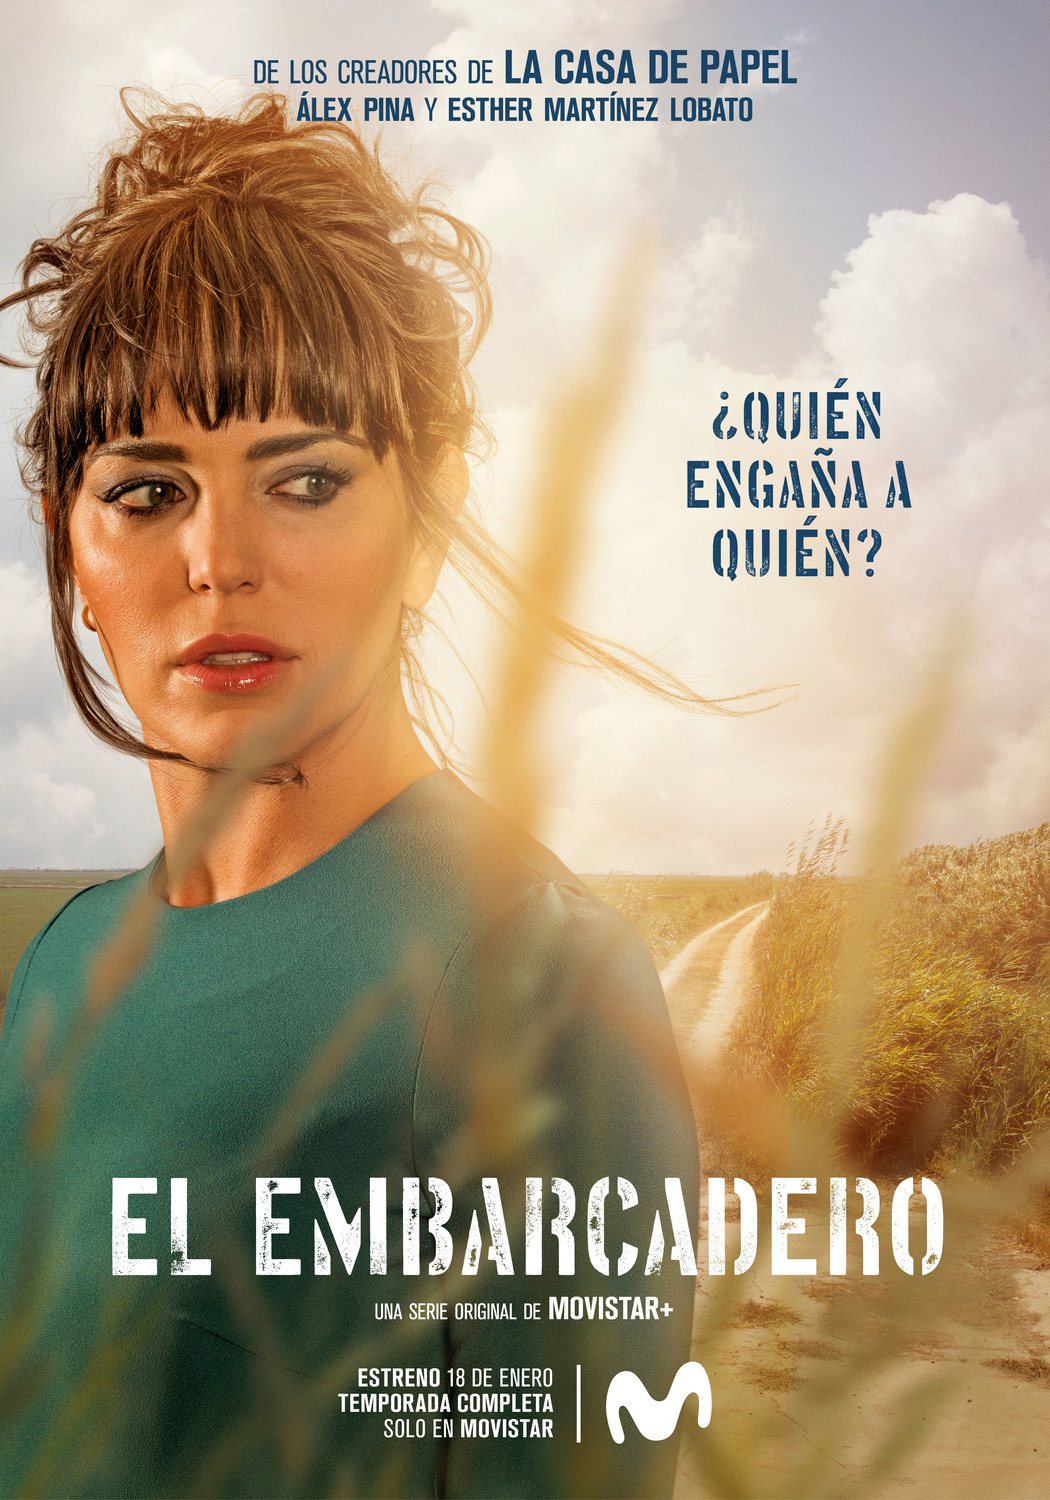 Extra Large TV Poster Image for El embarcadero (#9 of 16)